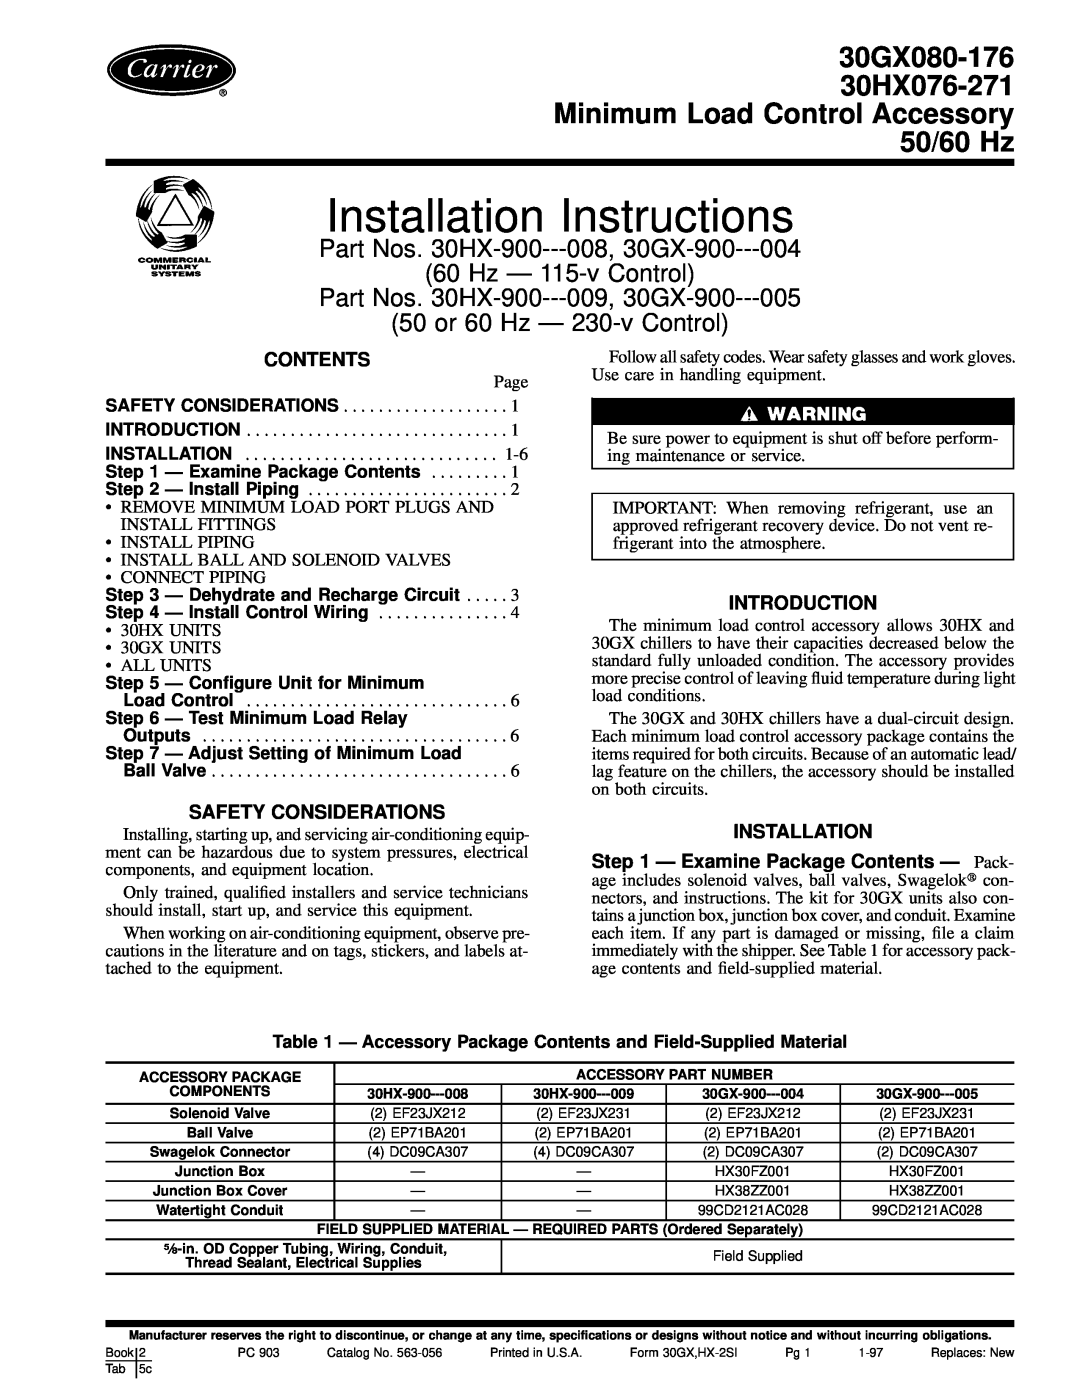 Carrier 30HX076-271, 30GX080-176 installation instructions Contents, Introduction, Safety Considerations, Installation 